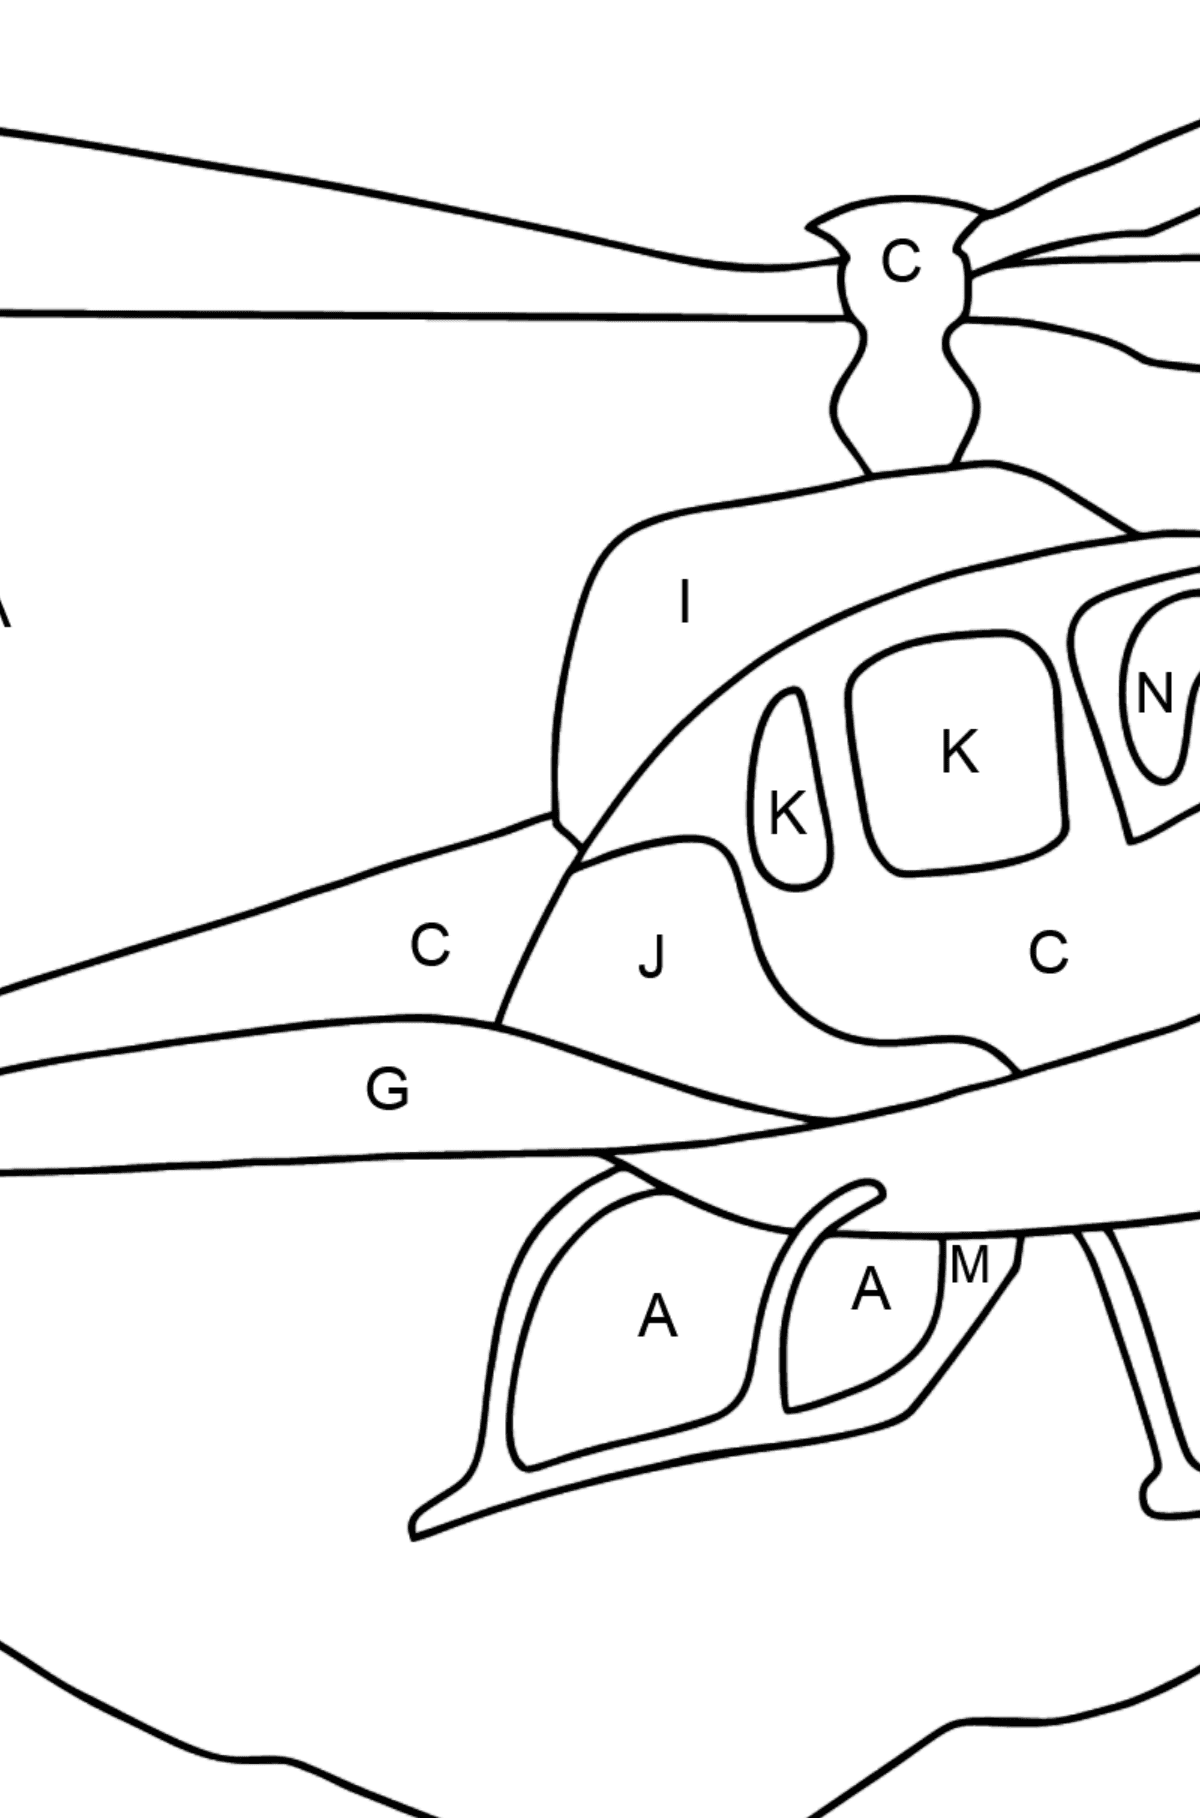 Coloring Page - A City Helicopter - Coloring by Letters for Kids